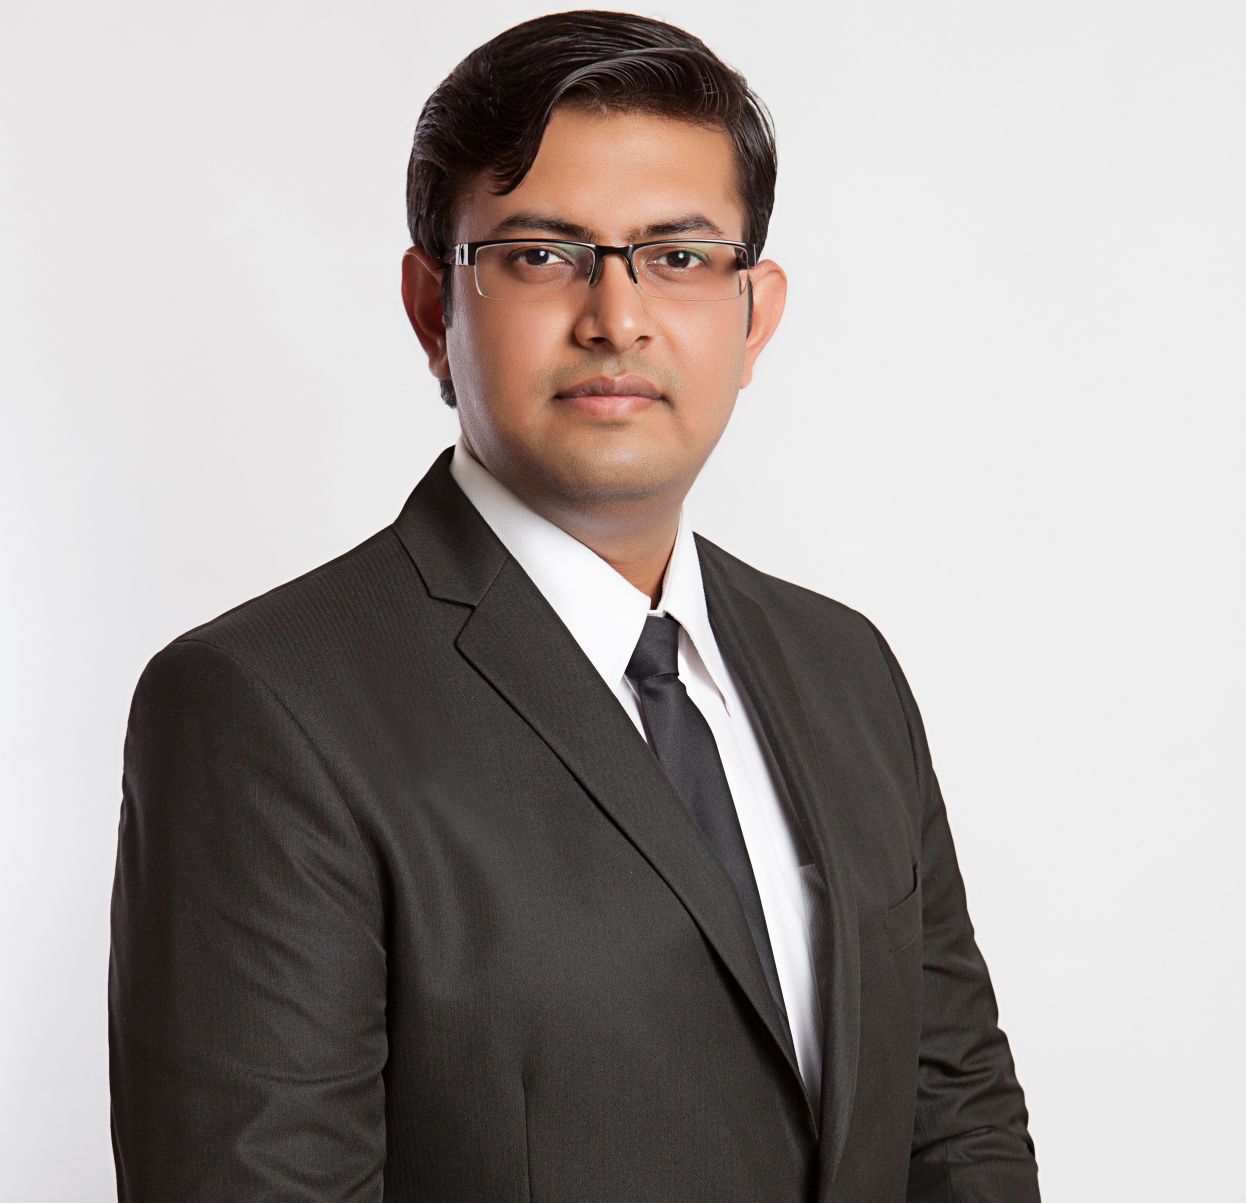 Kushal  Rastogi, <span>Founder and CEO, Knight FinTech Research Pvt Ltd</span>